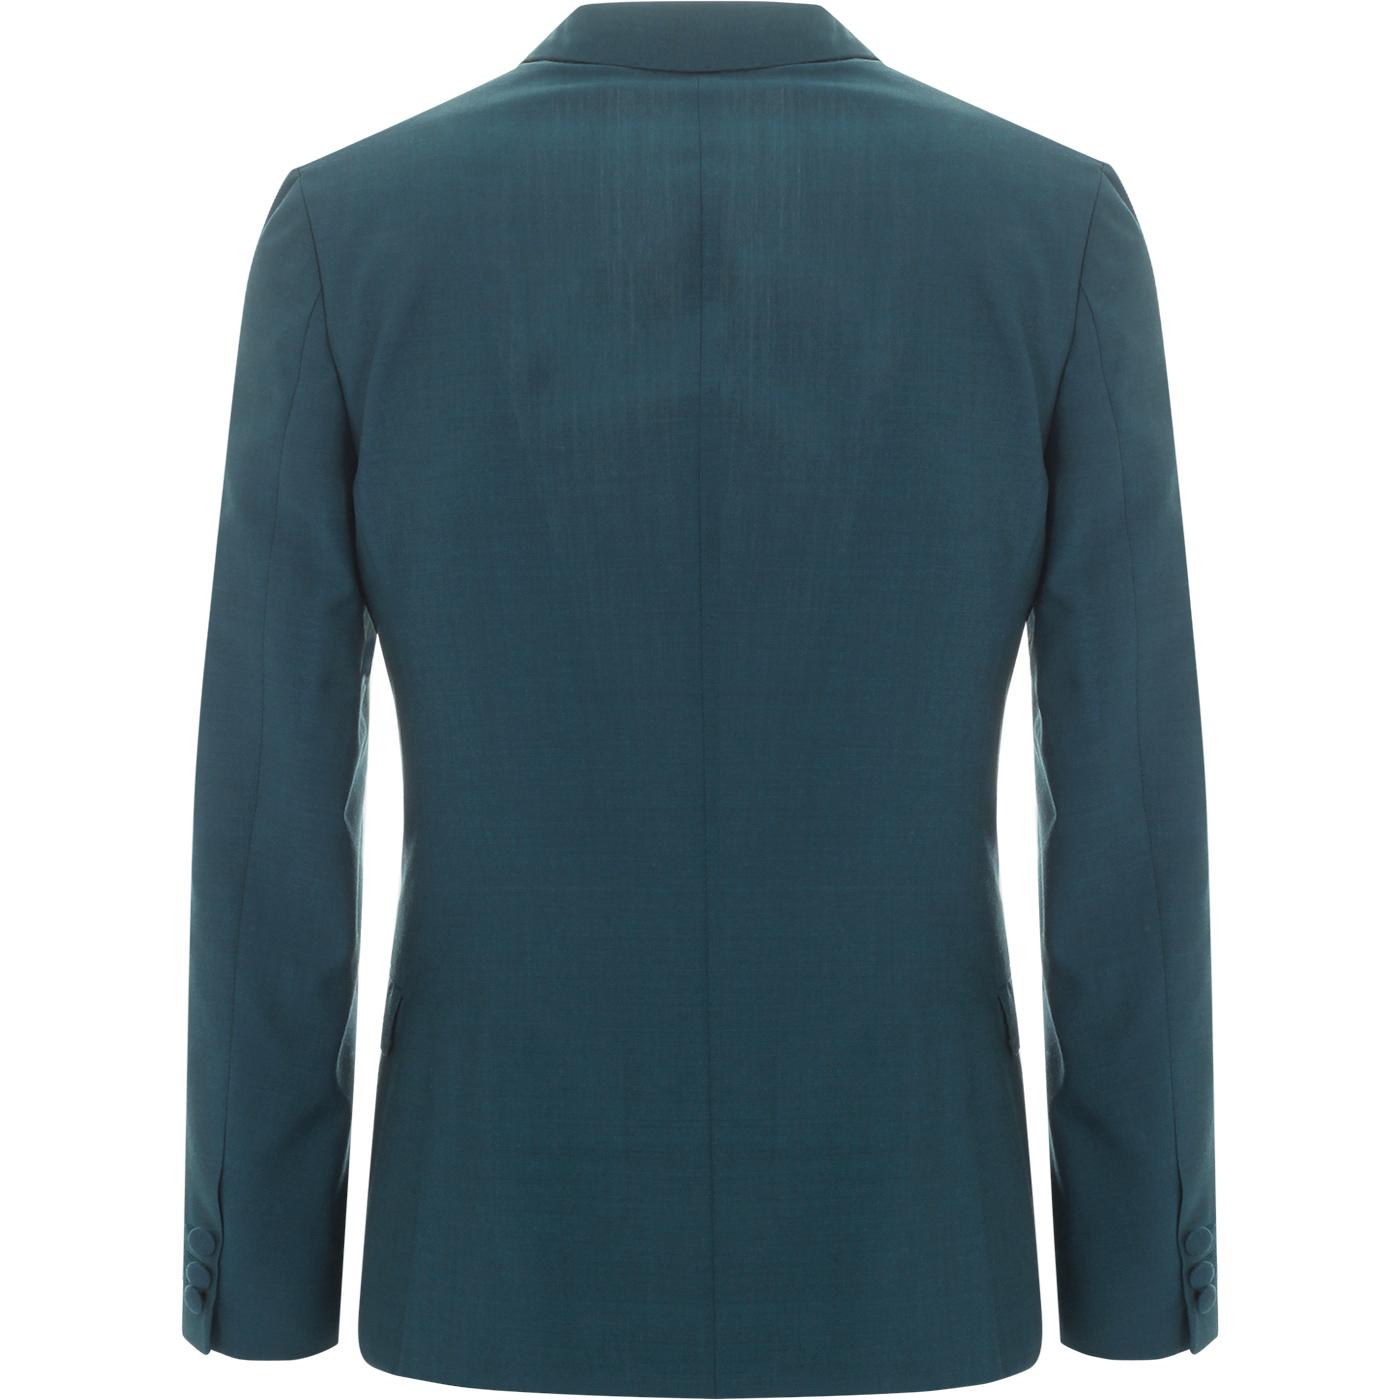 MADCAP ENGLAND Retro 60s Mod 2 or 3 Piece Suit in Teal